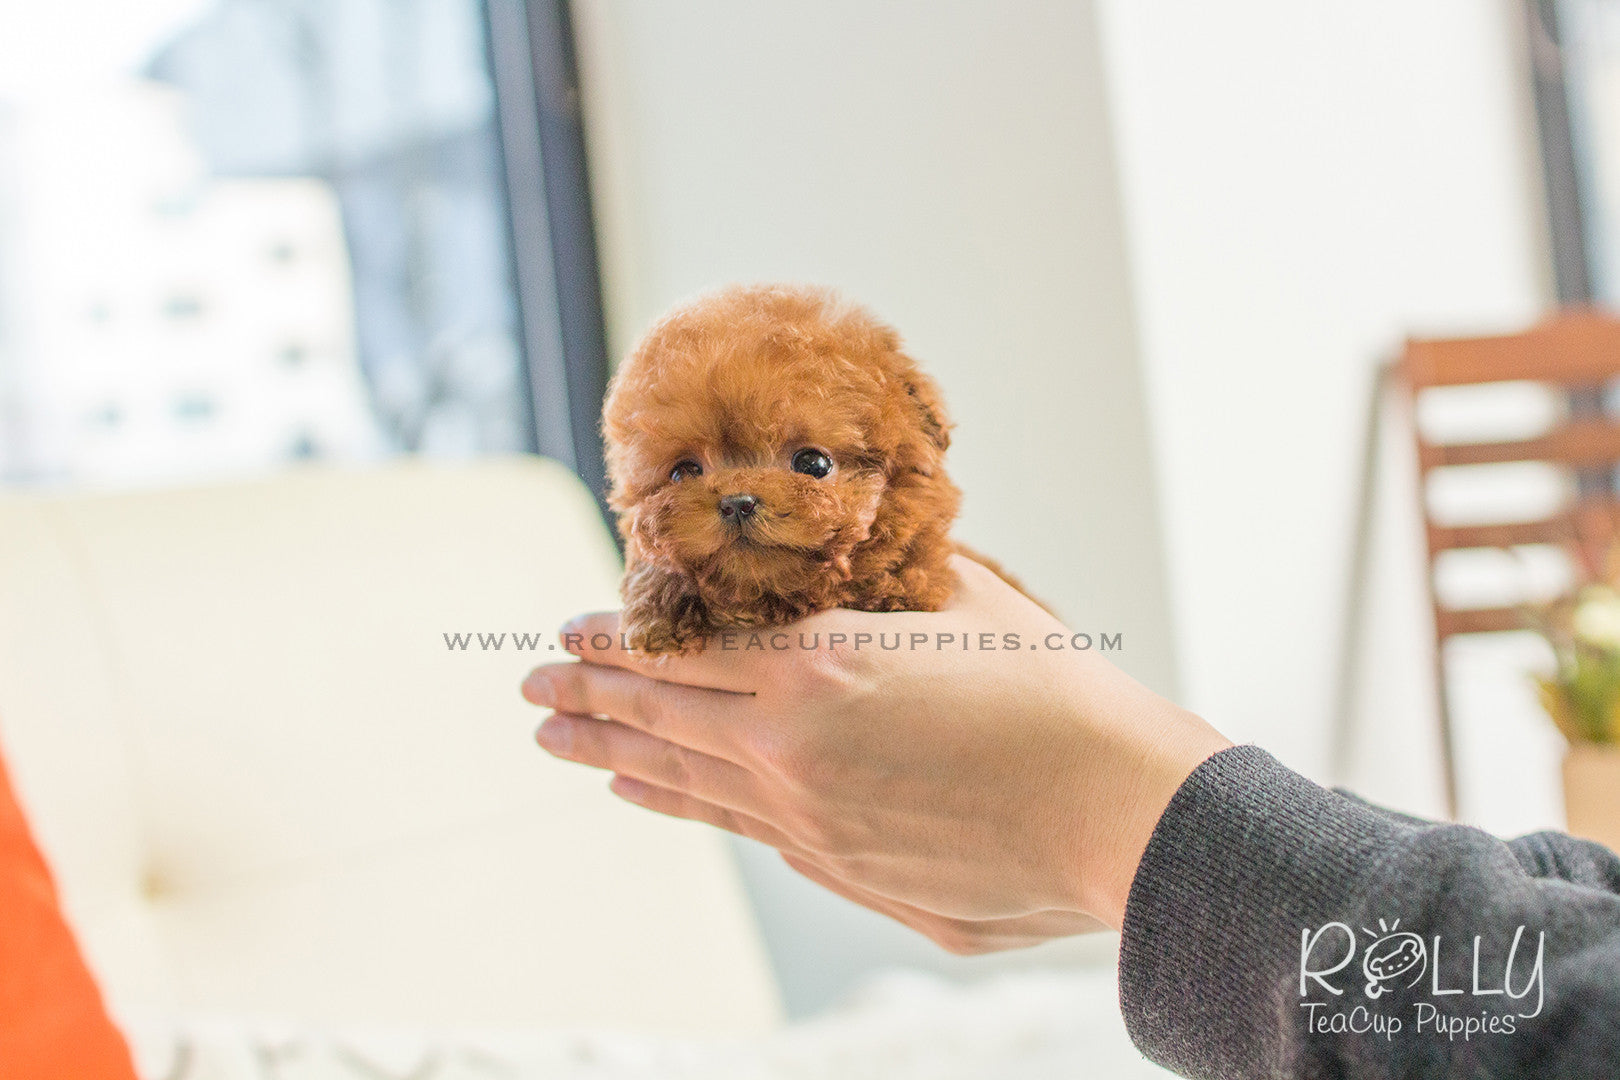 rolly teacup poodles for sale